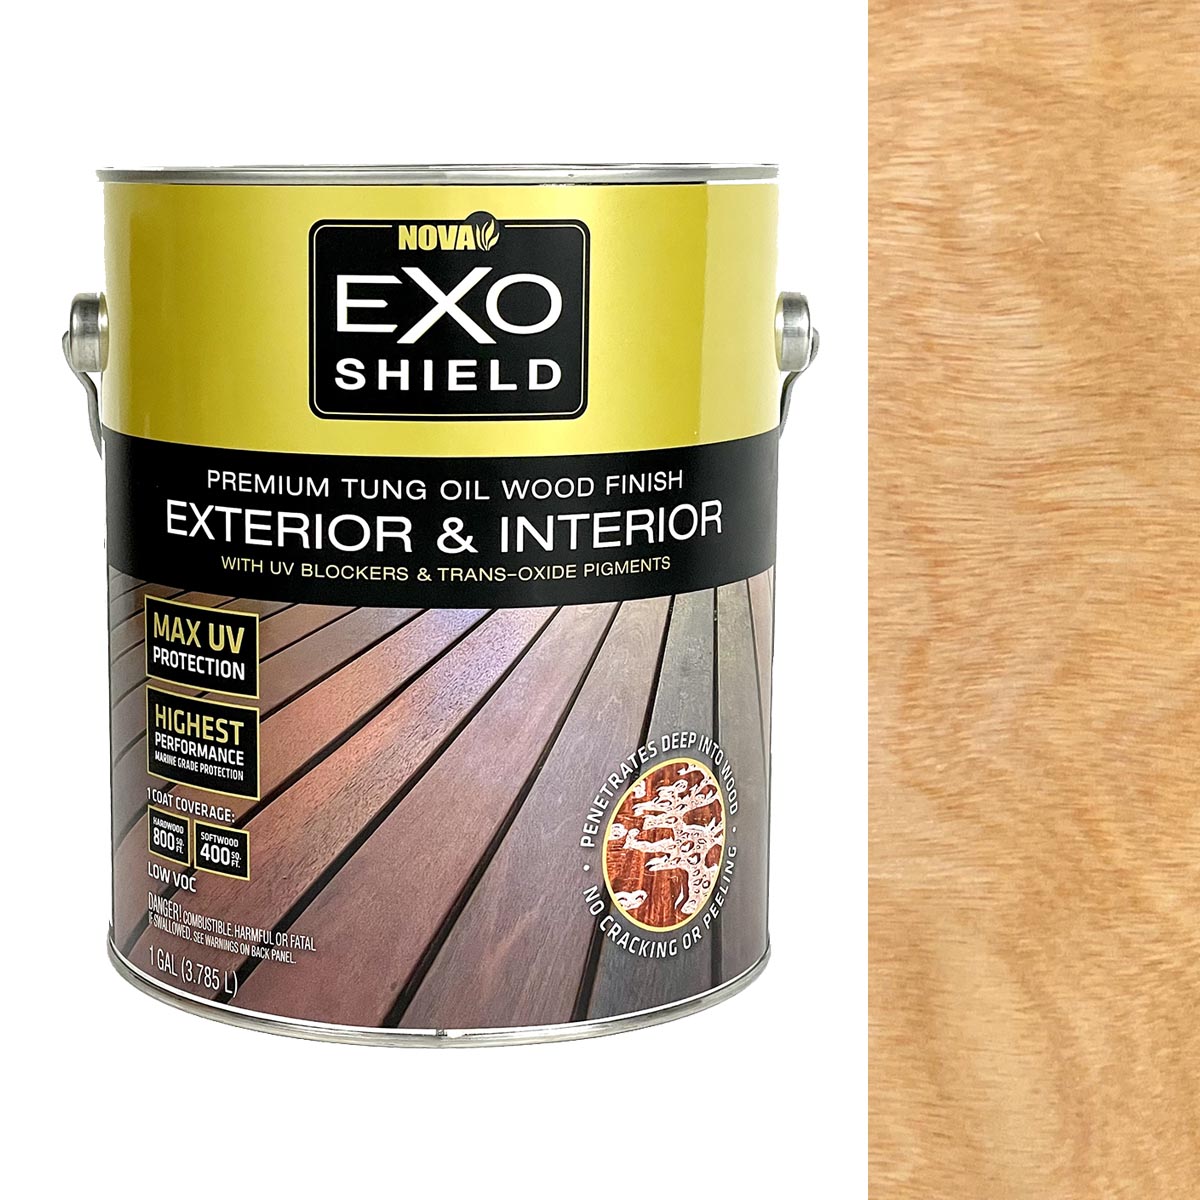 ExoShield Tung Oil Wood Stain in Natural Half Pint